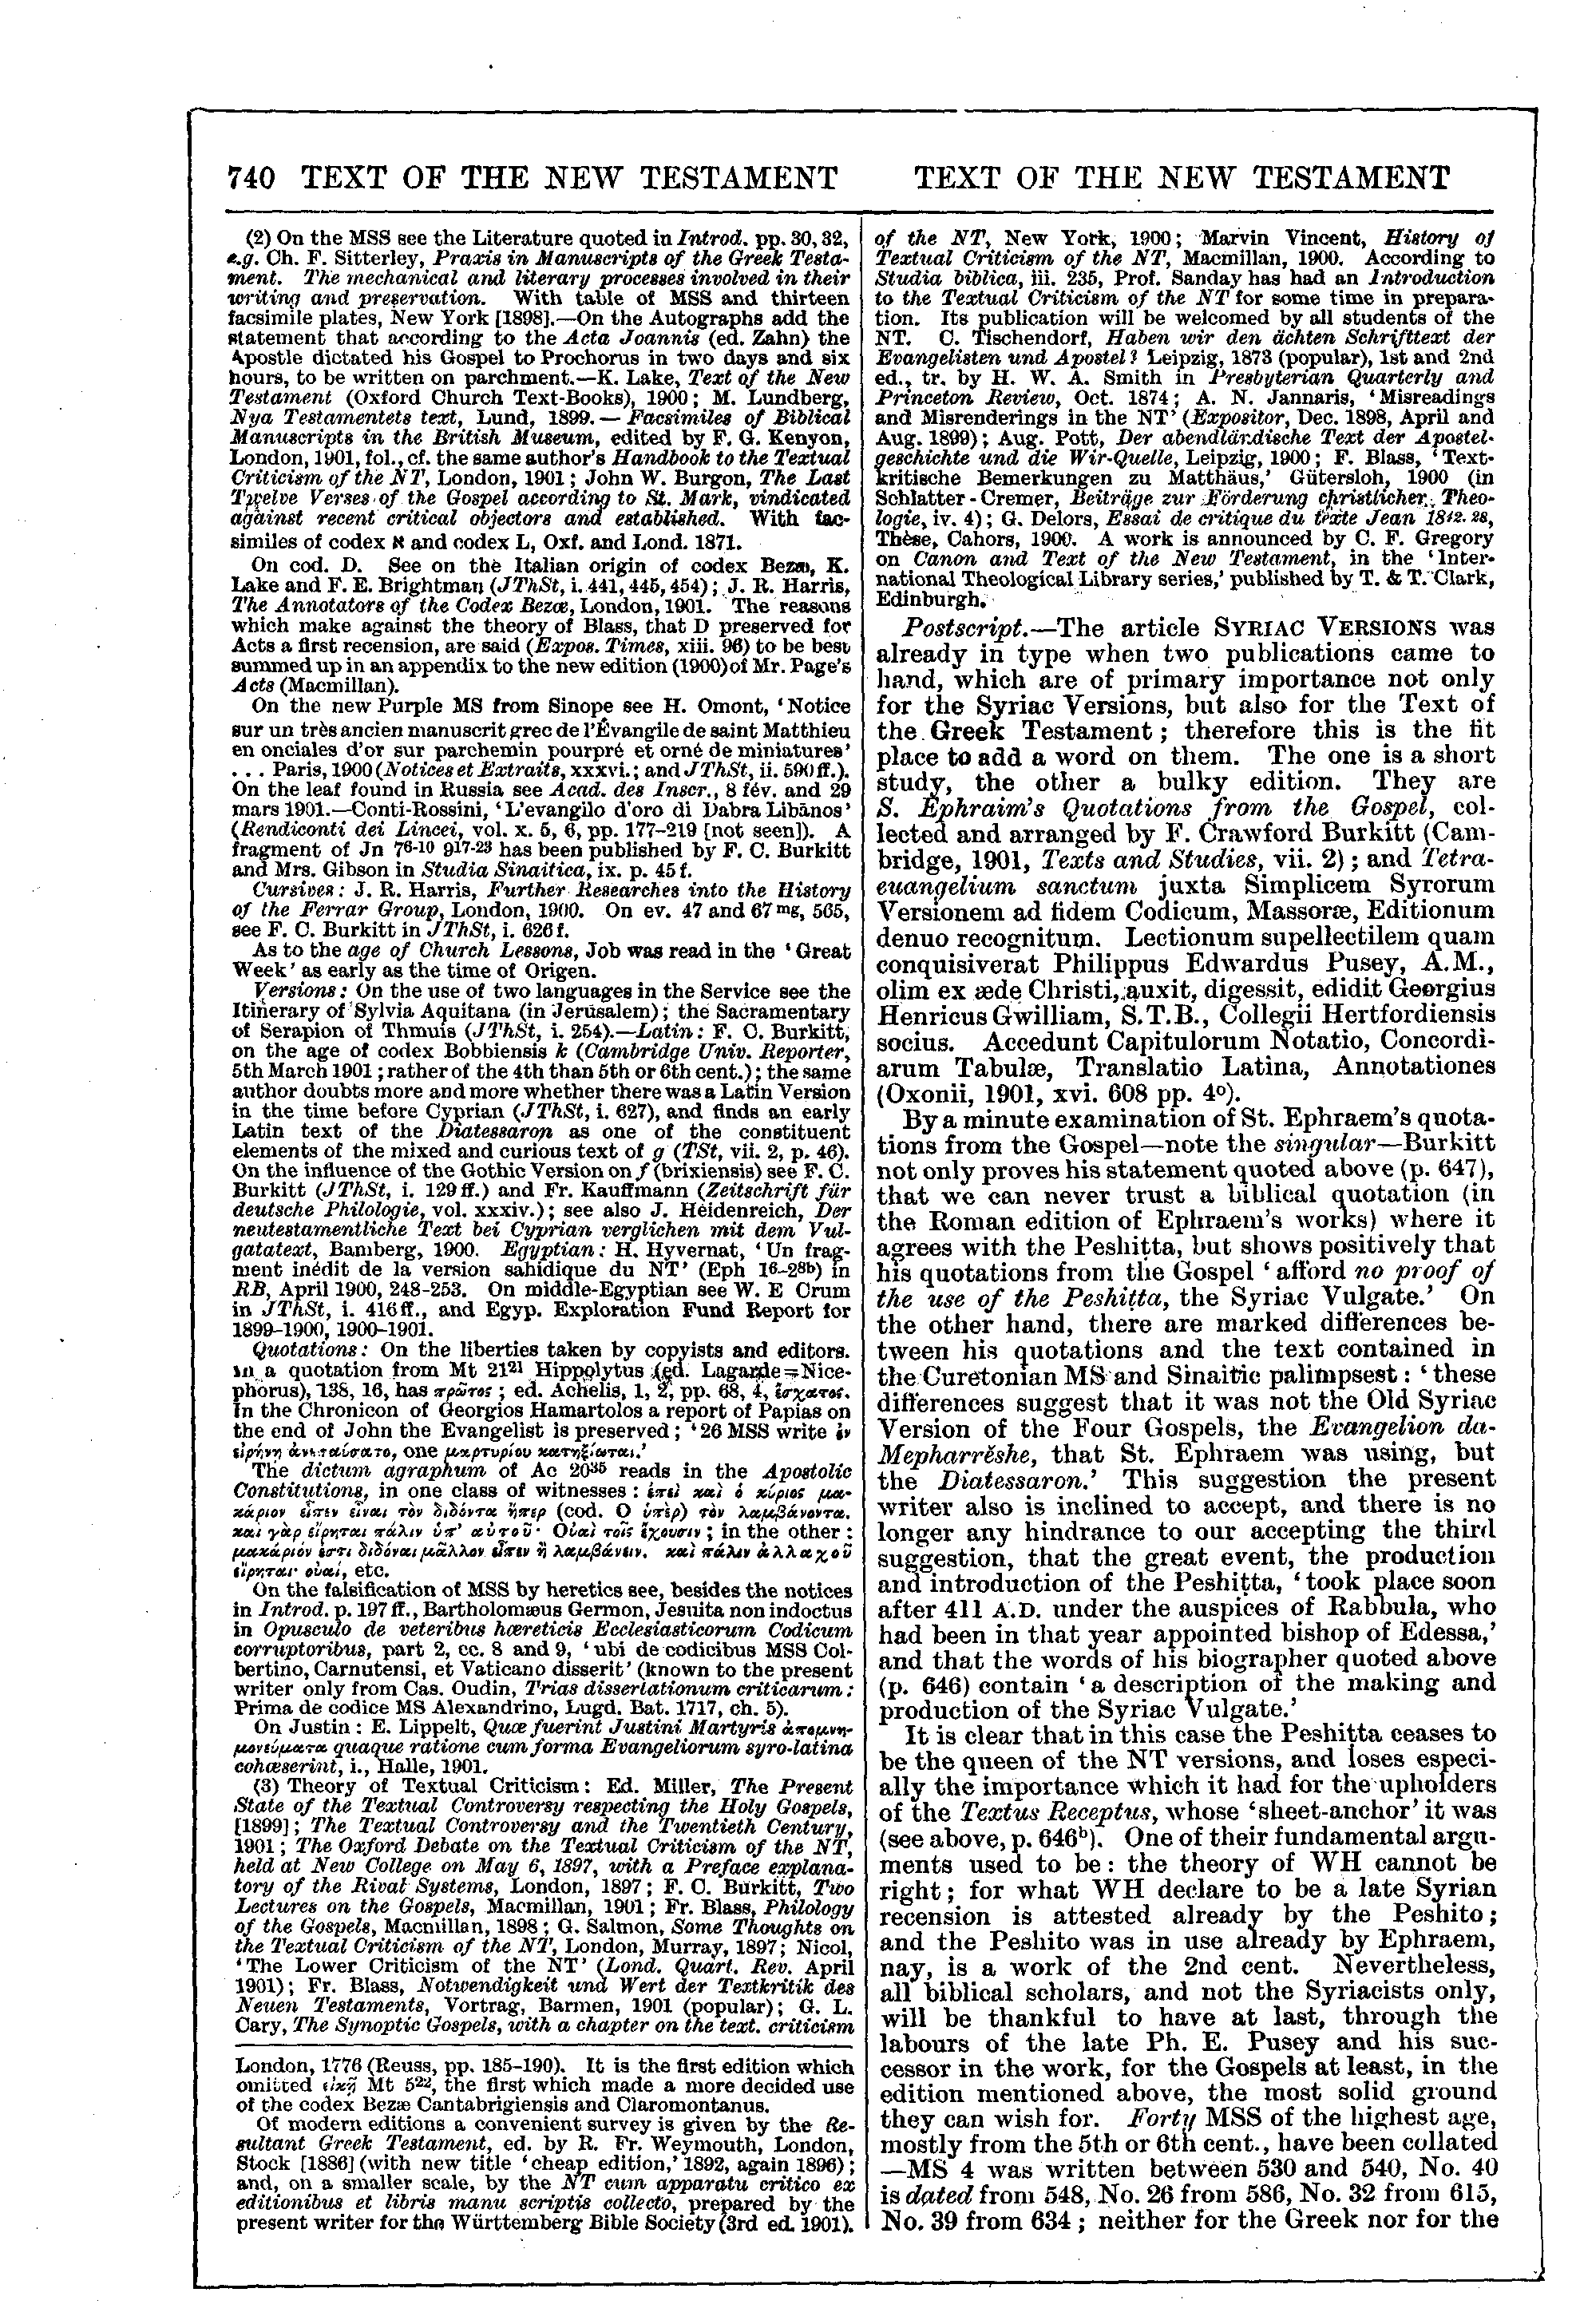 Image of page 740